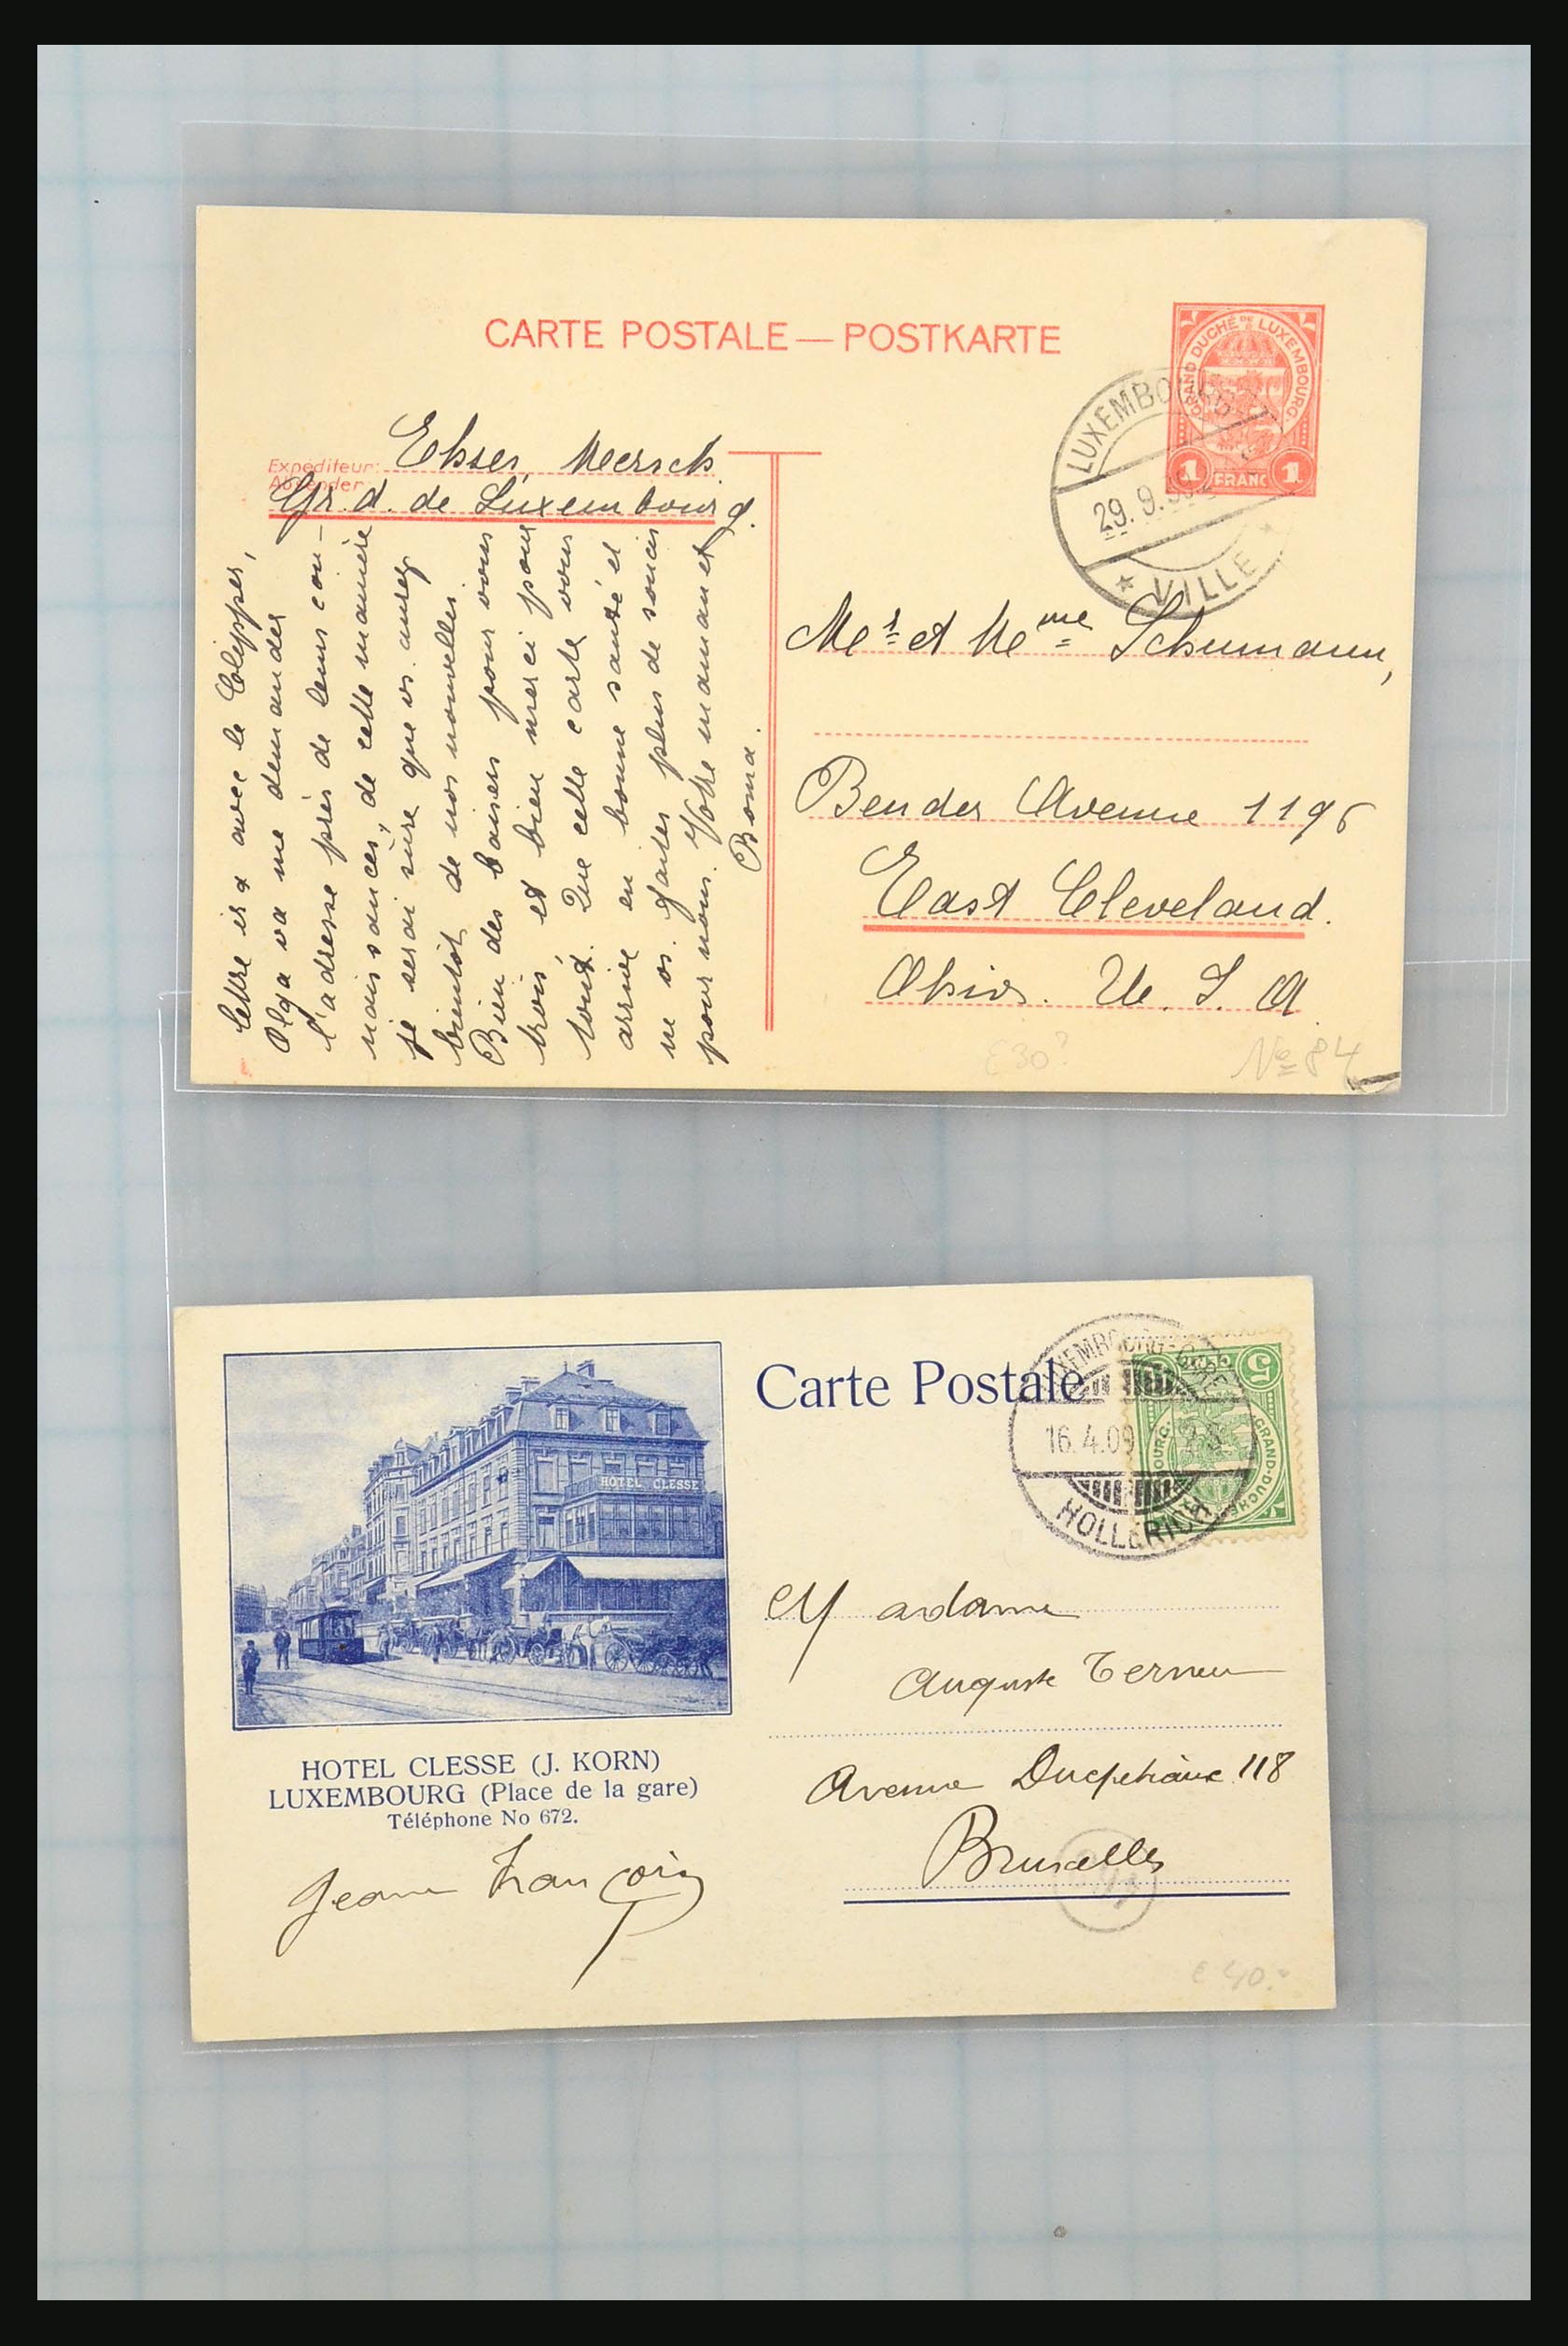 31358 040 - 31358 Portugal/Luxemburg/Greece covers 1880-1960.